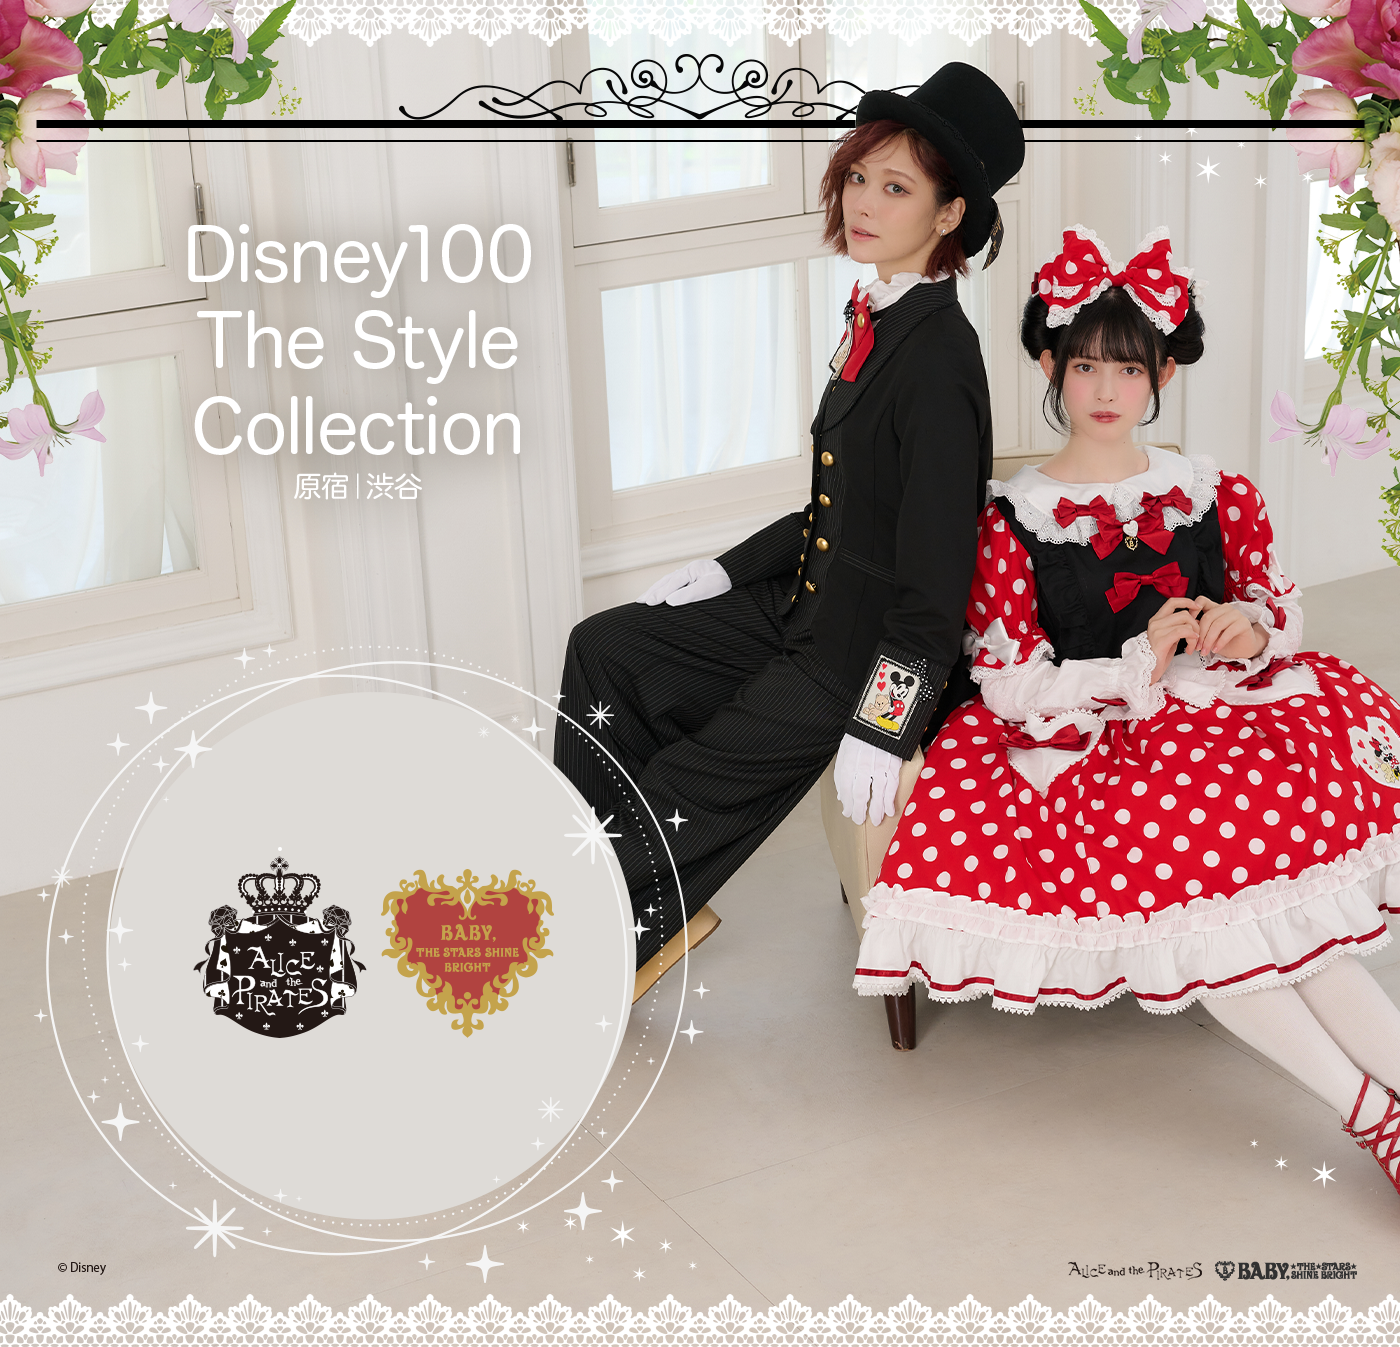 Disney100 The Style Collection 原宿/渋谷 | BABY, THE STARS SHINE 